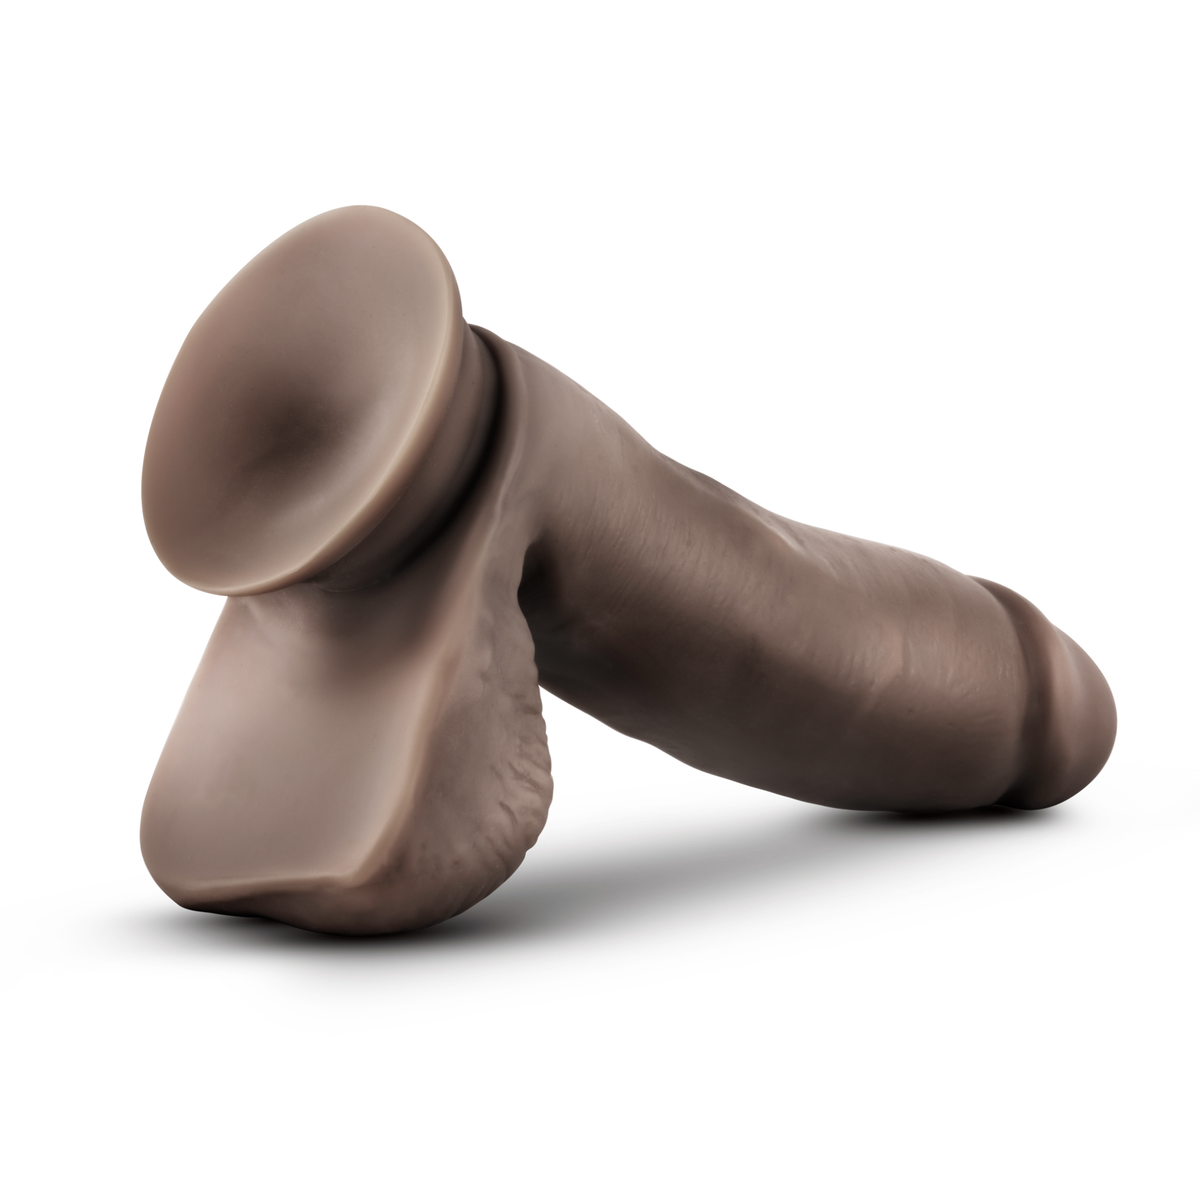 dr skin glide 7 inch self lubricating dildo with balls chocolate